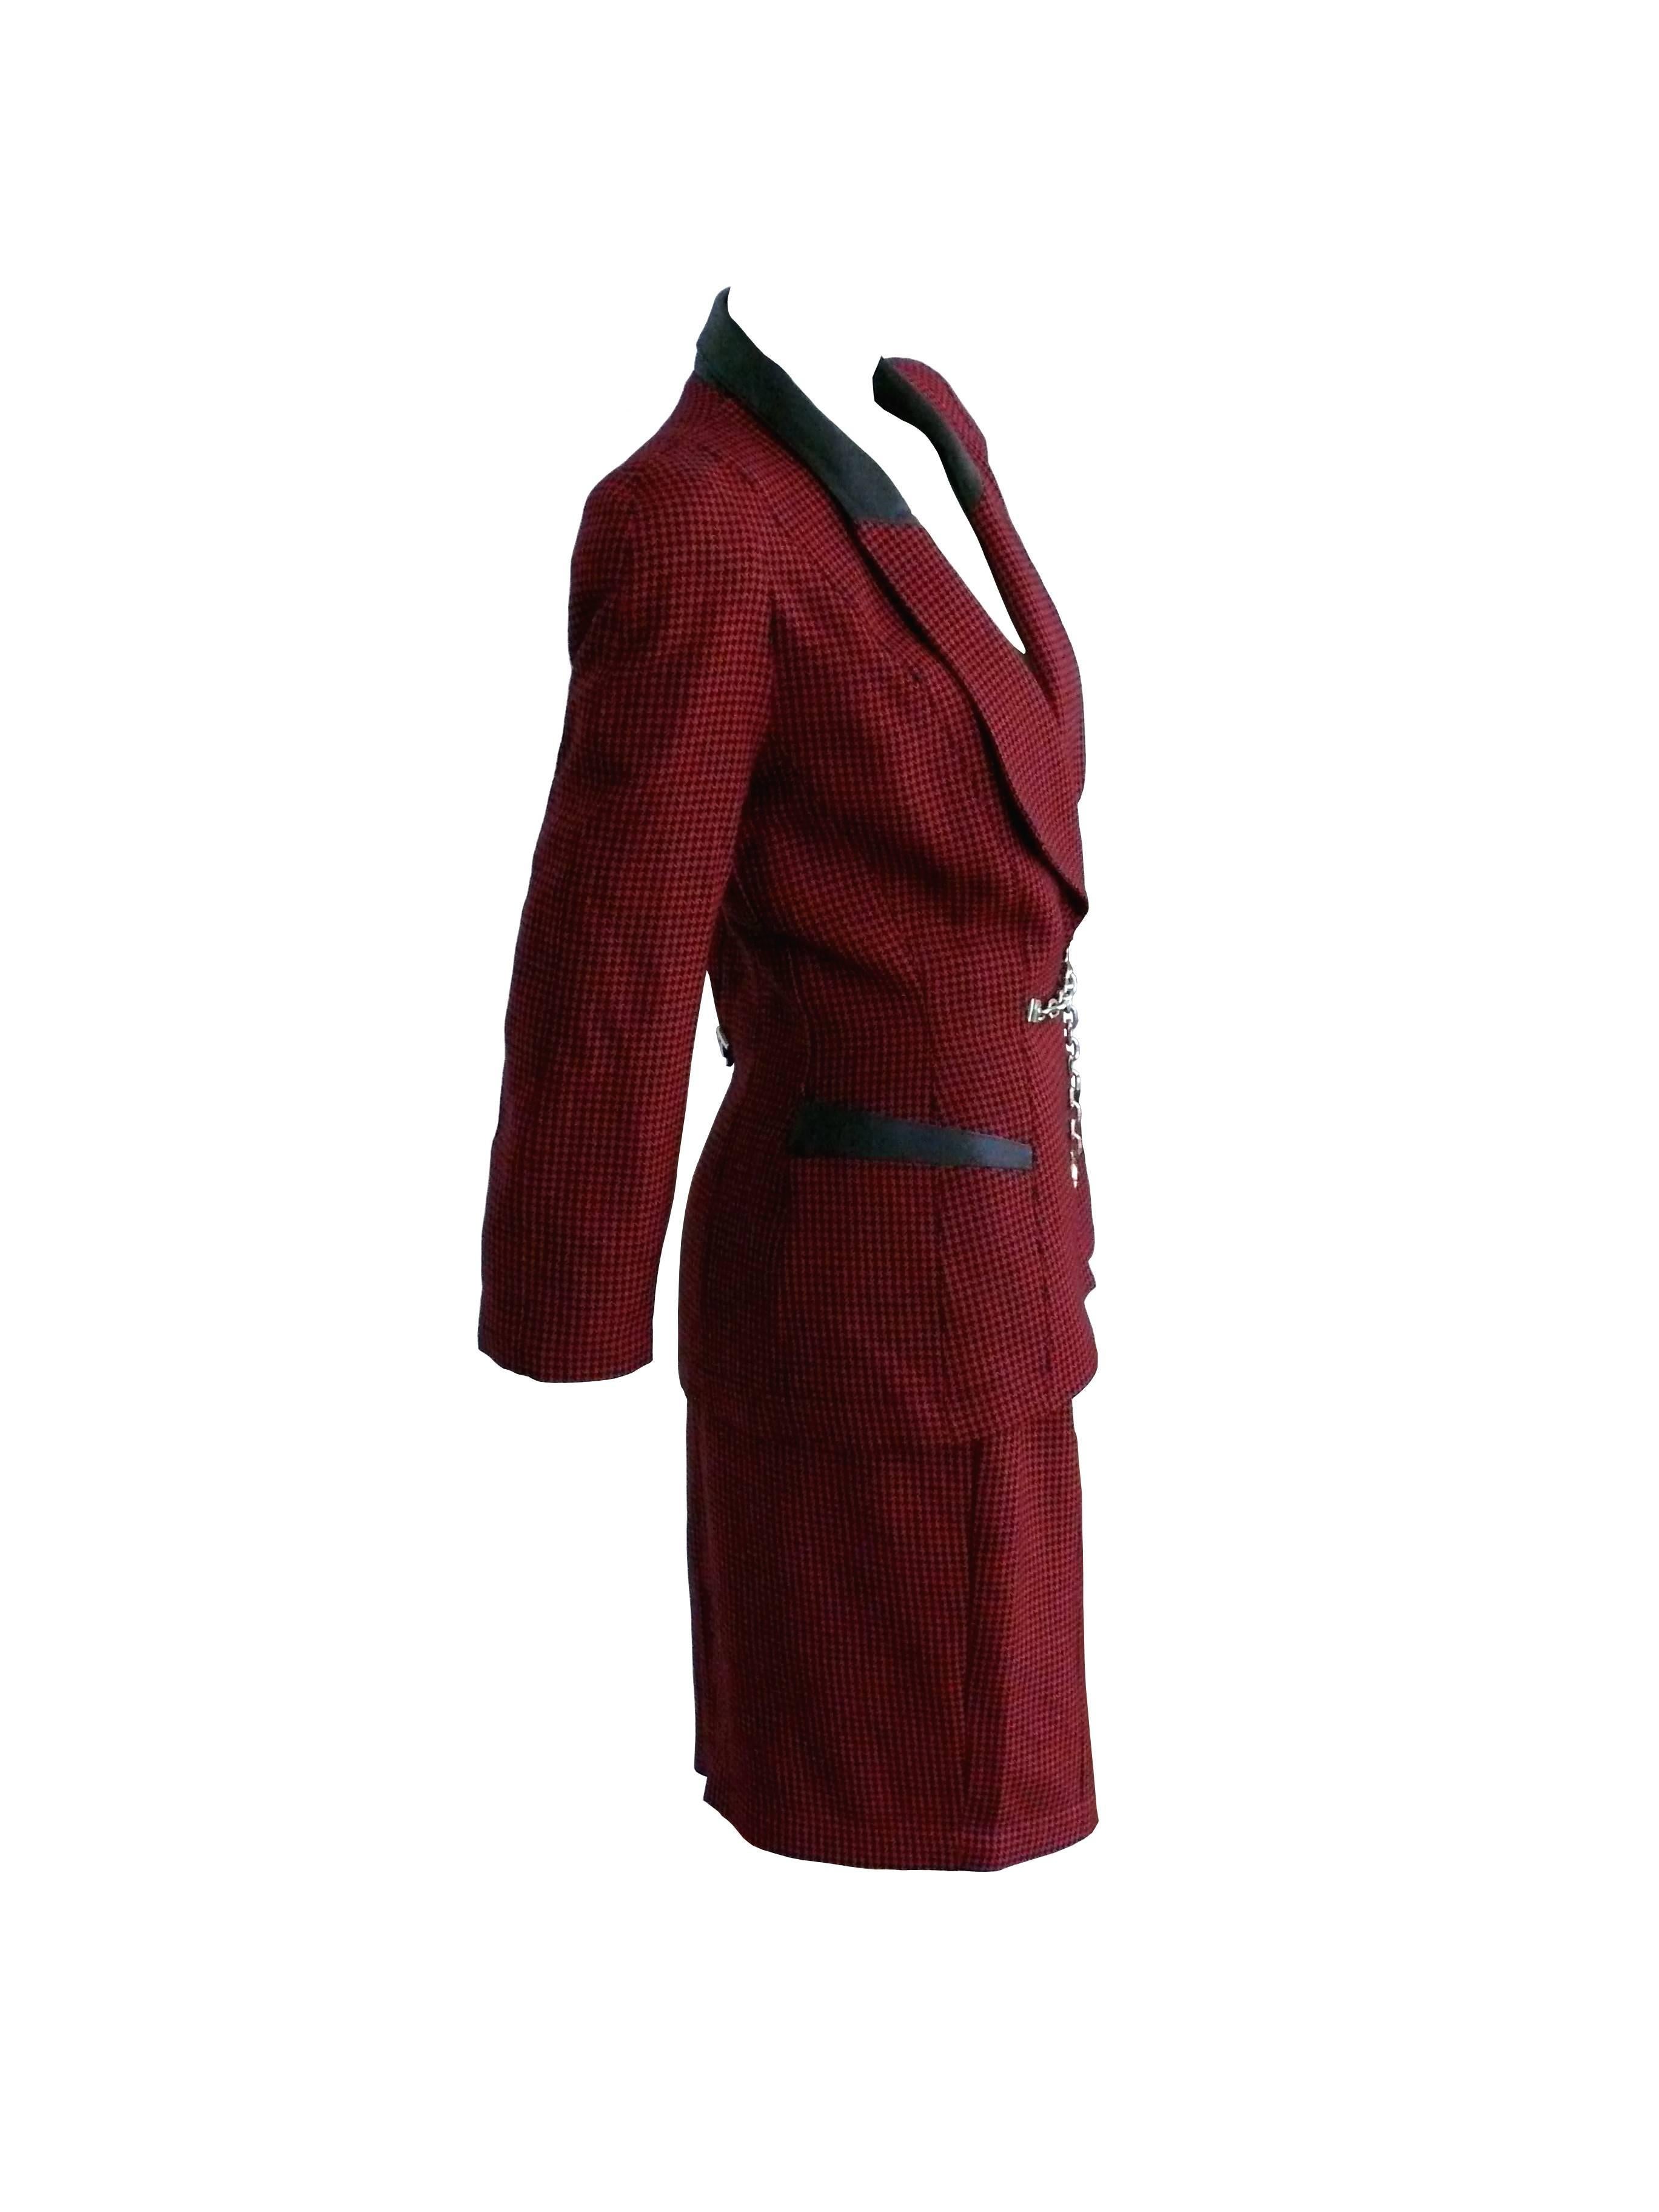 THIERRY MUGLER vintage classic 1940s inspired red-black houndstooth wool skirt suit with leather and chain details.

Jacket has shoulder pads and black leather detail on top of the lapels. 
Two pockets.
Hidden snap closure.
Massive silver tone